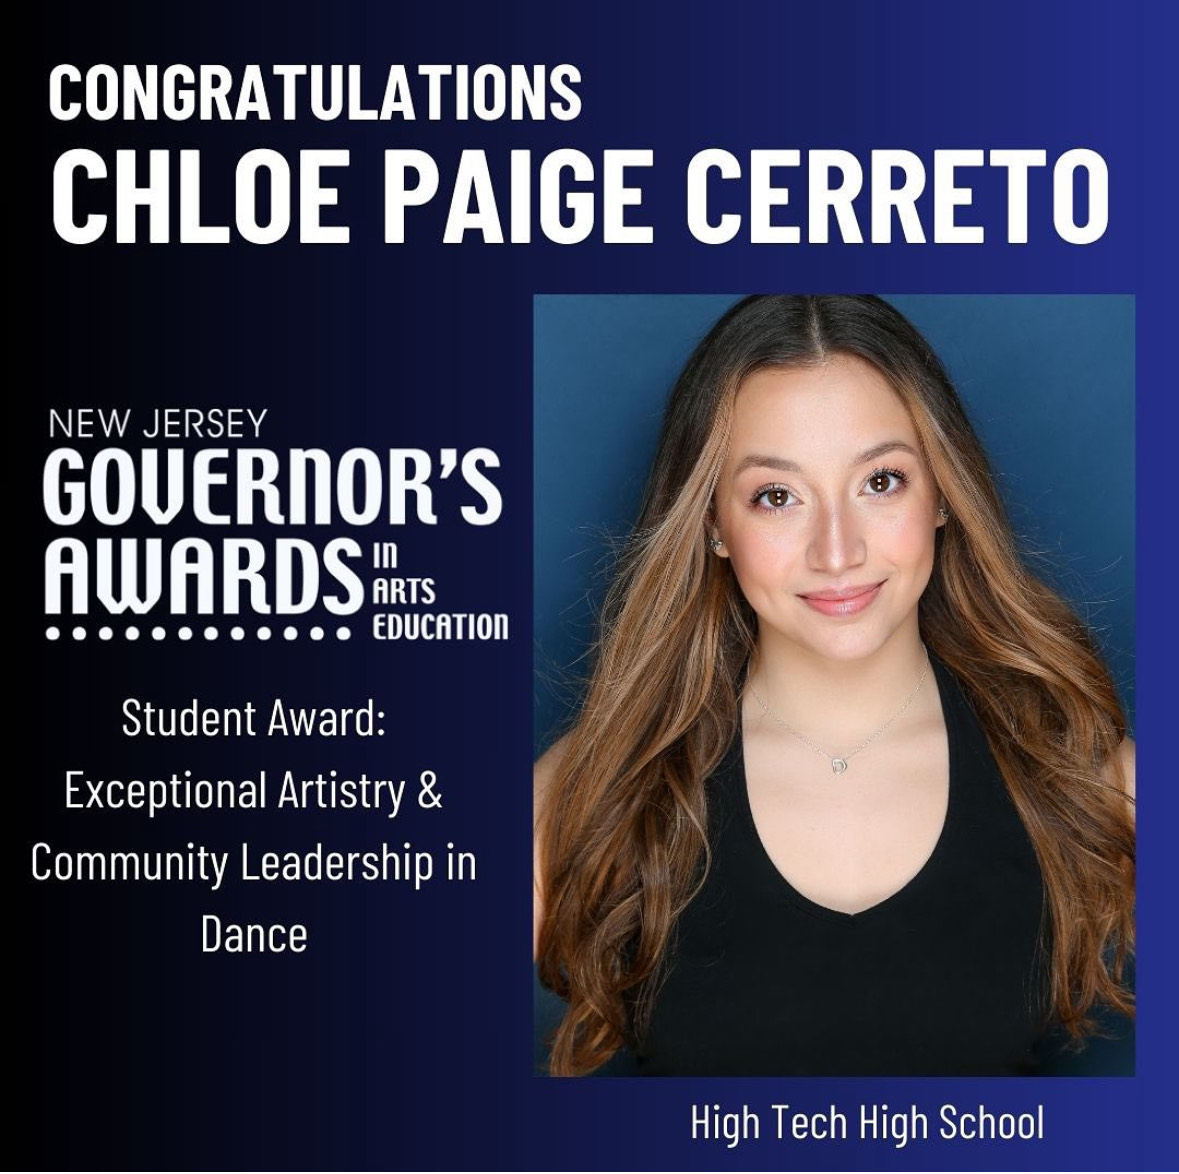 Chloe Paige Cerreto Governor's Award for Exceptional Artistry & Community Leadership in Dance